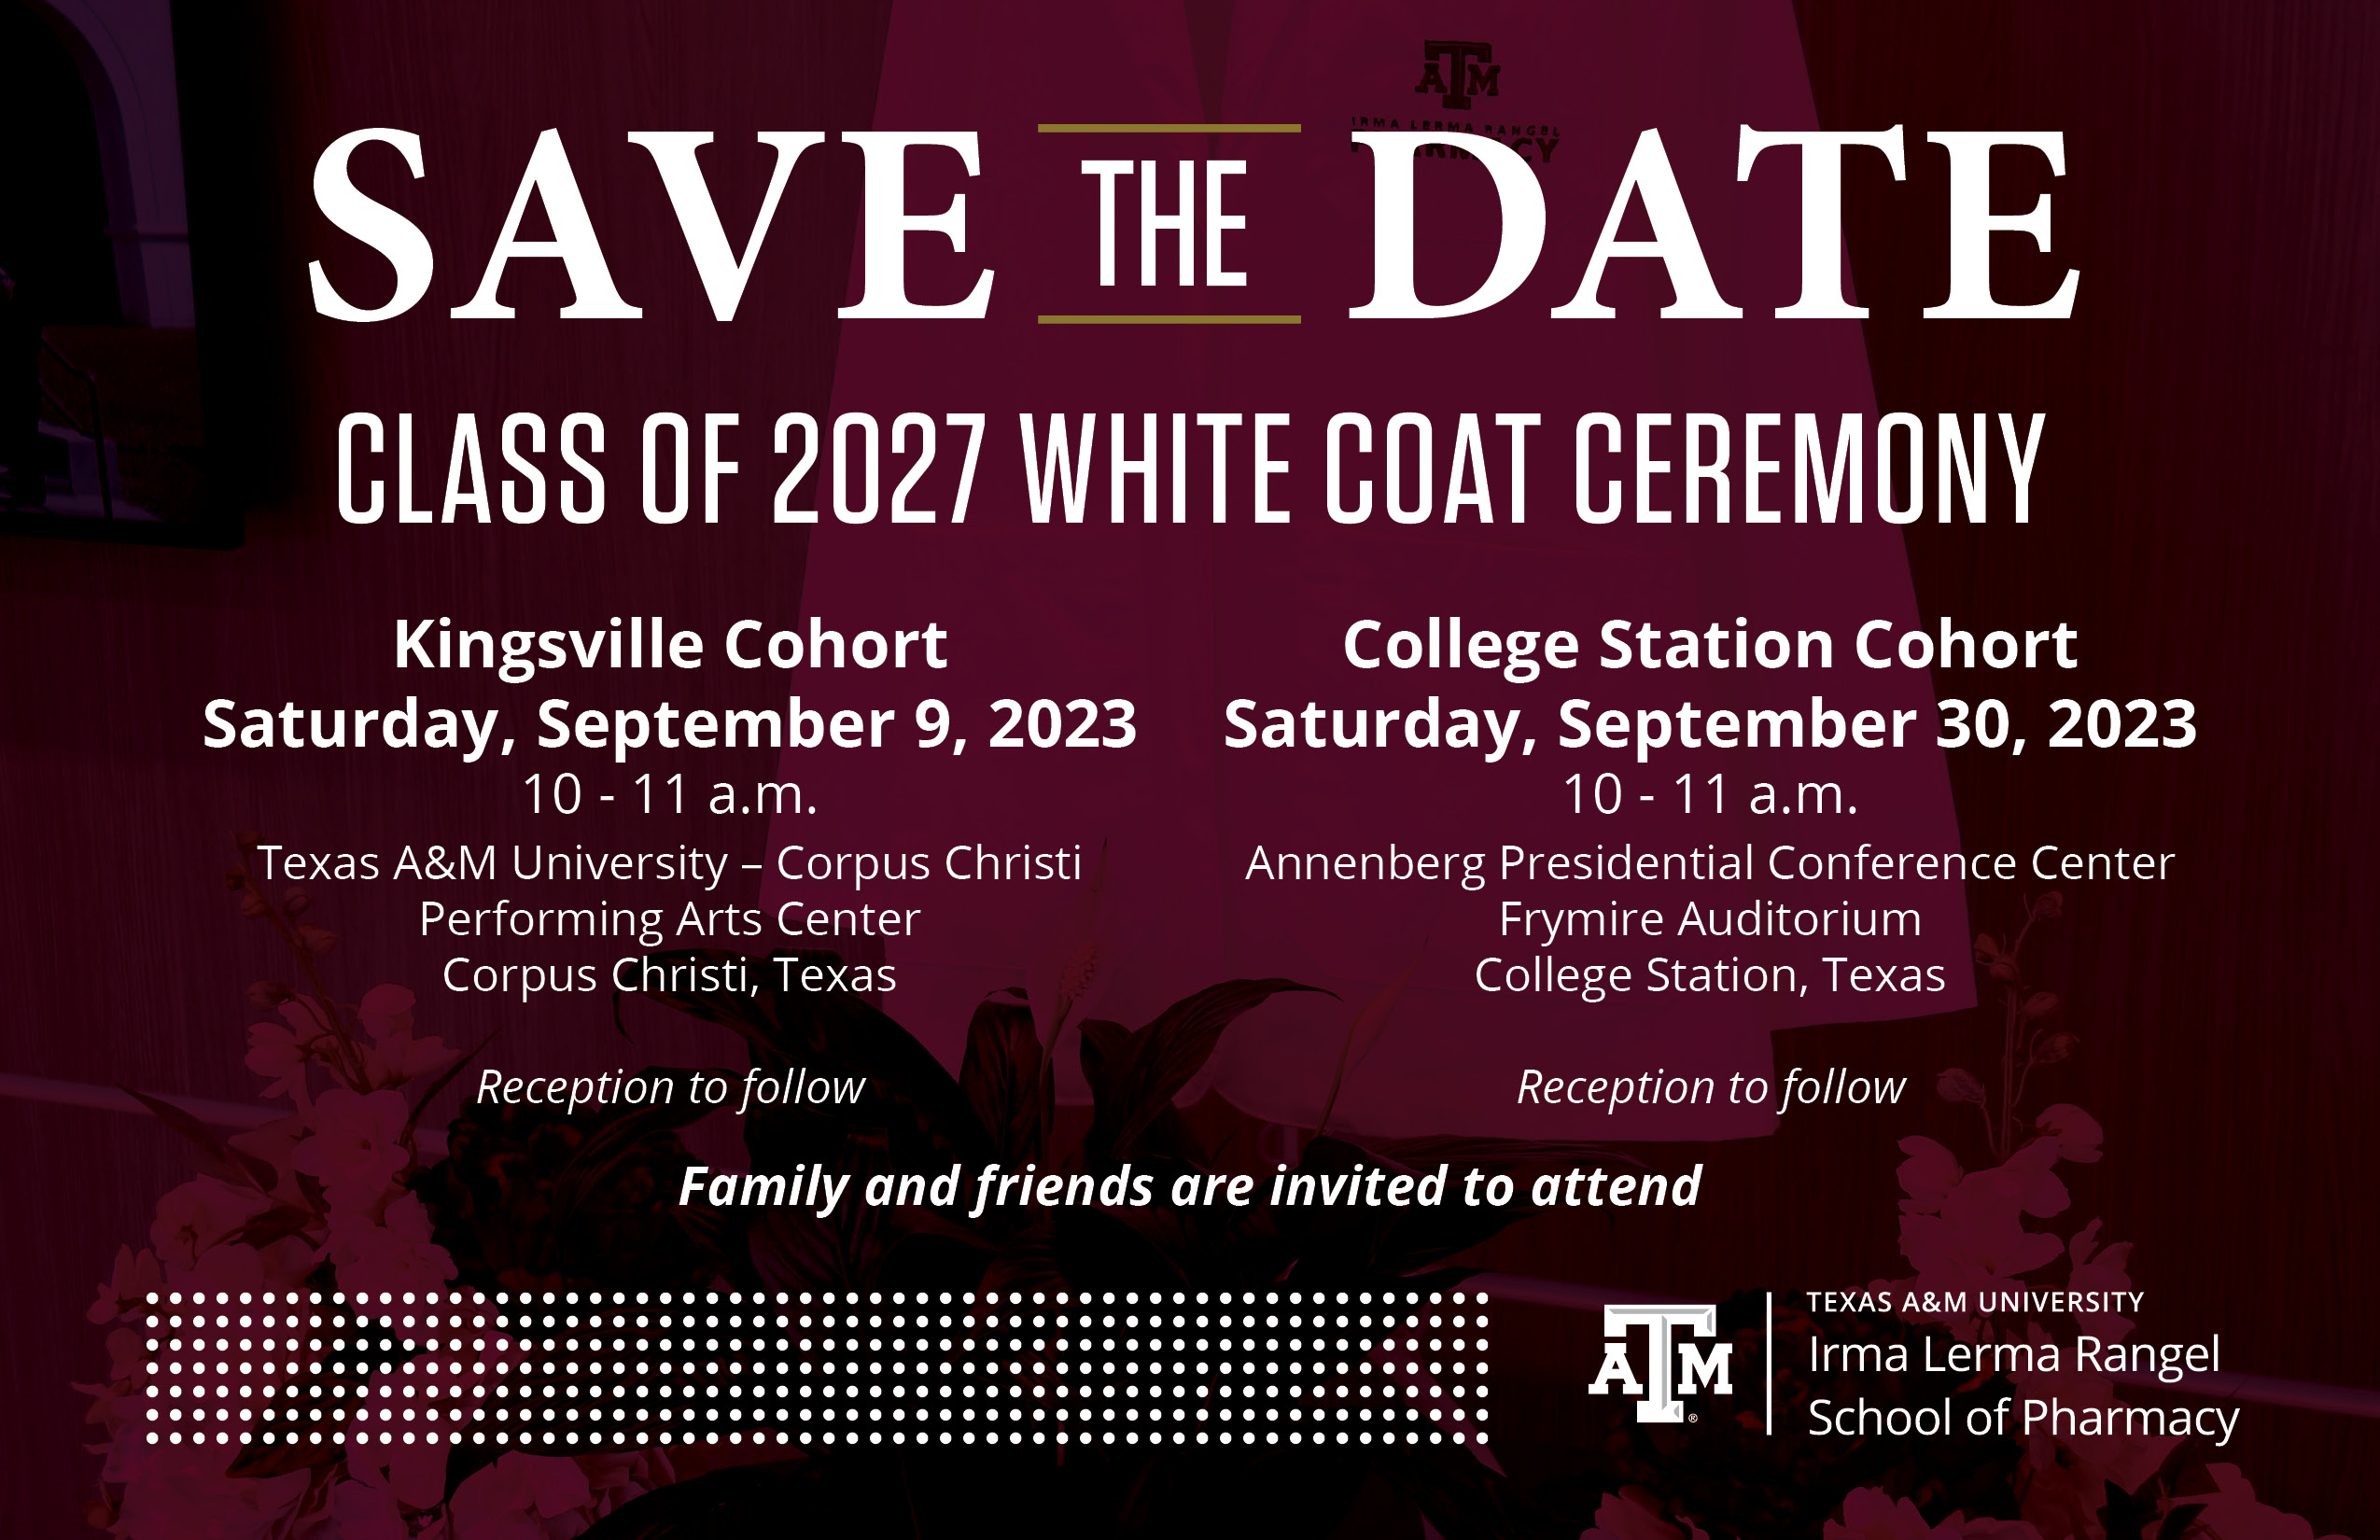 CO-2027-WCC-save-the-date.jpg